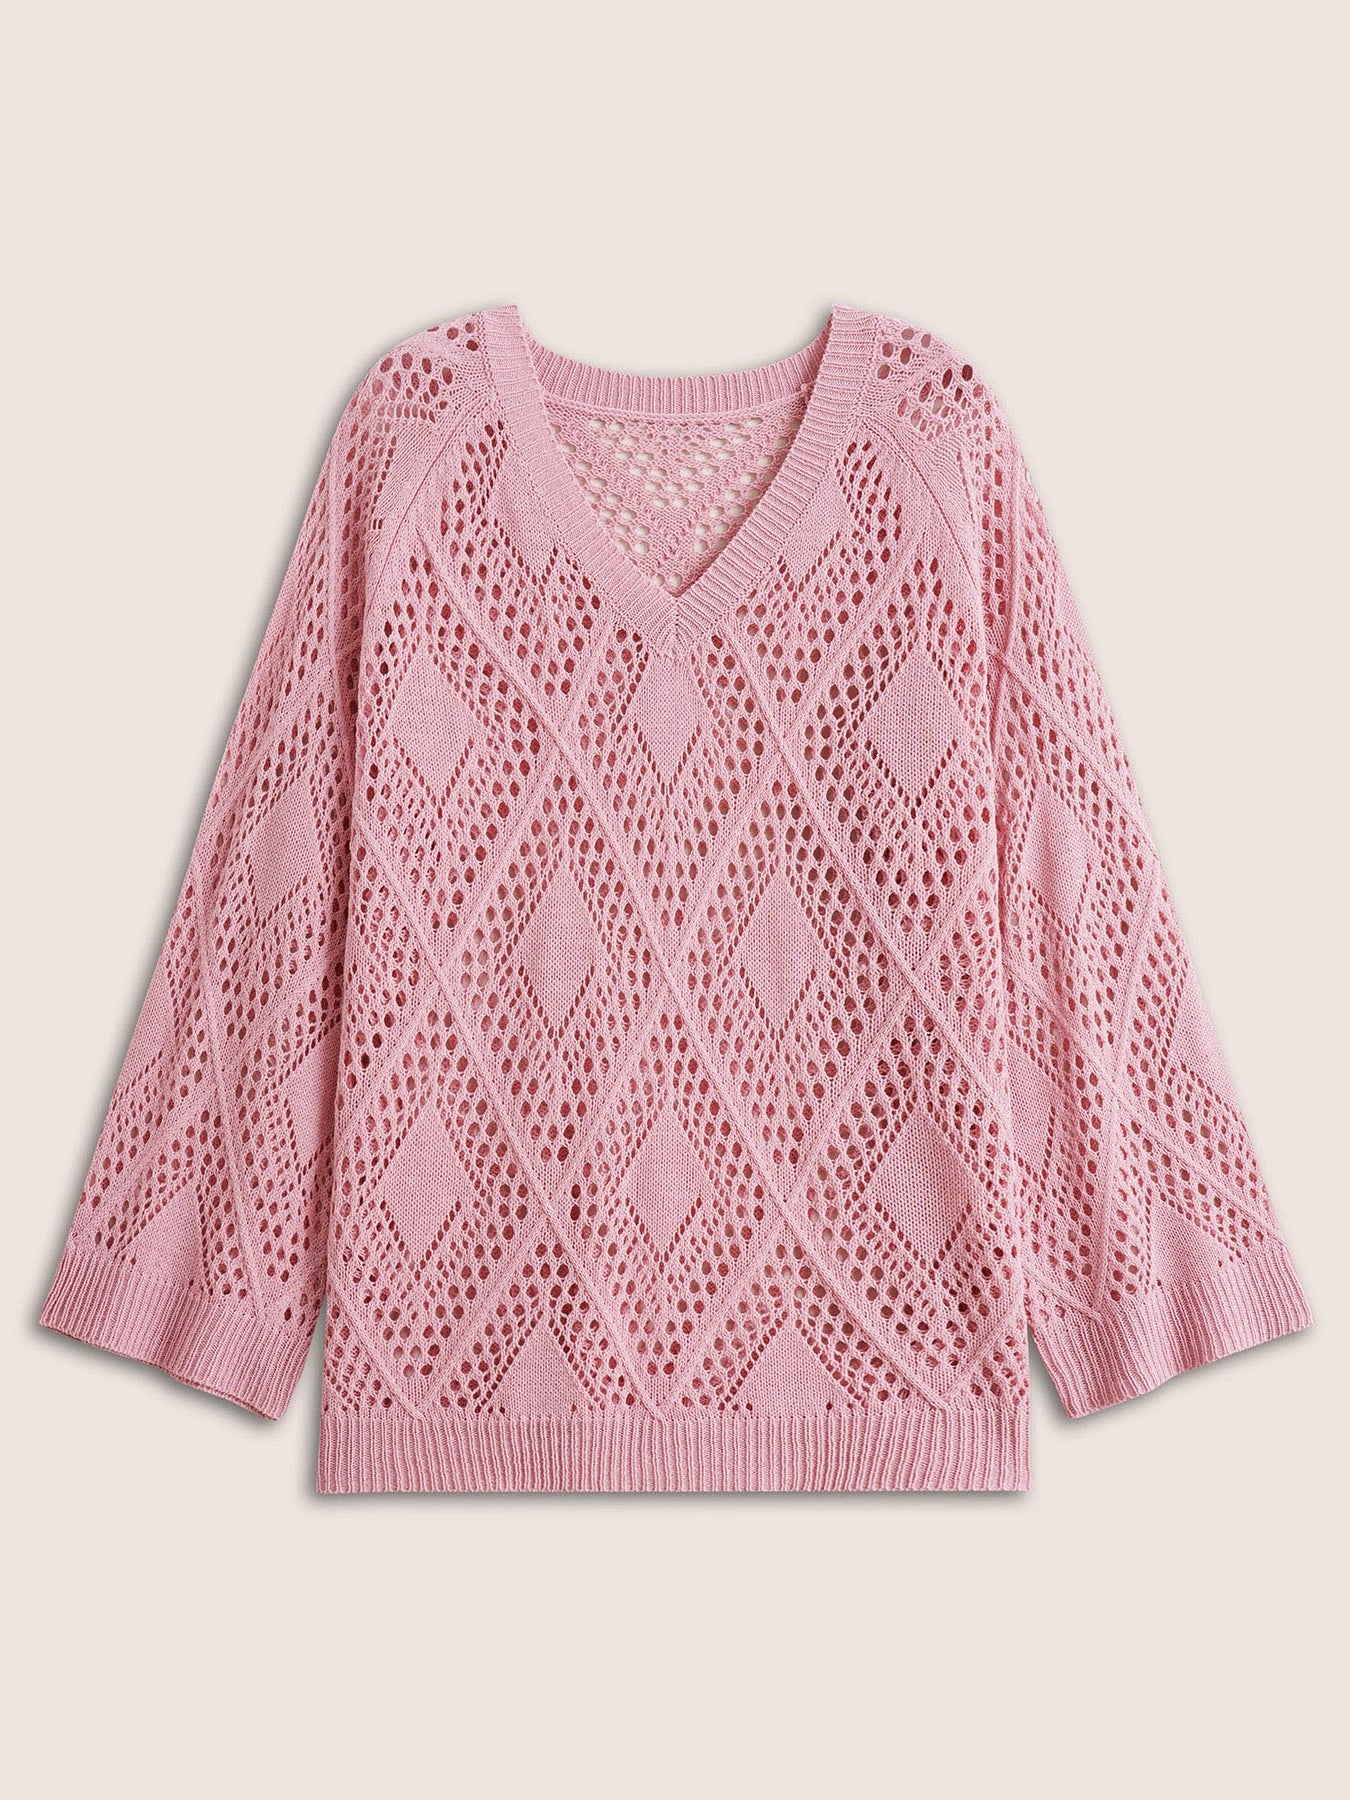 Plus Size Pullovers, Geometric Hollow Out Bell Sleeve Pullover